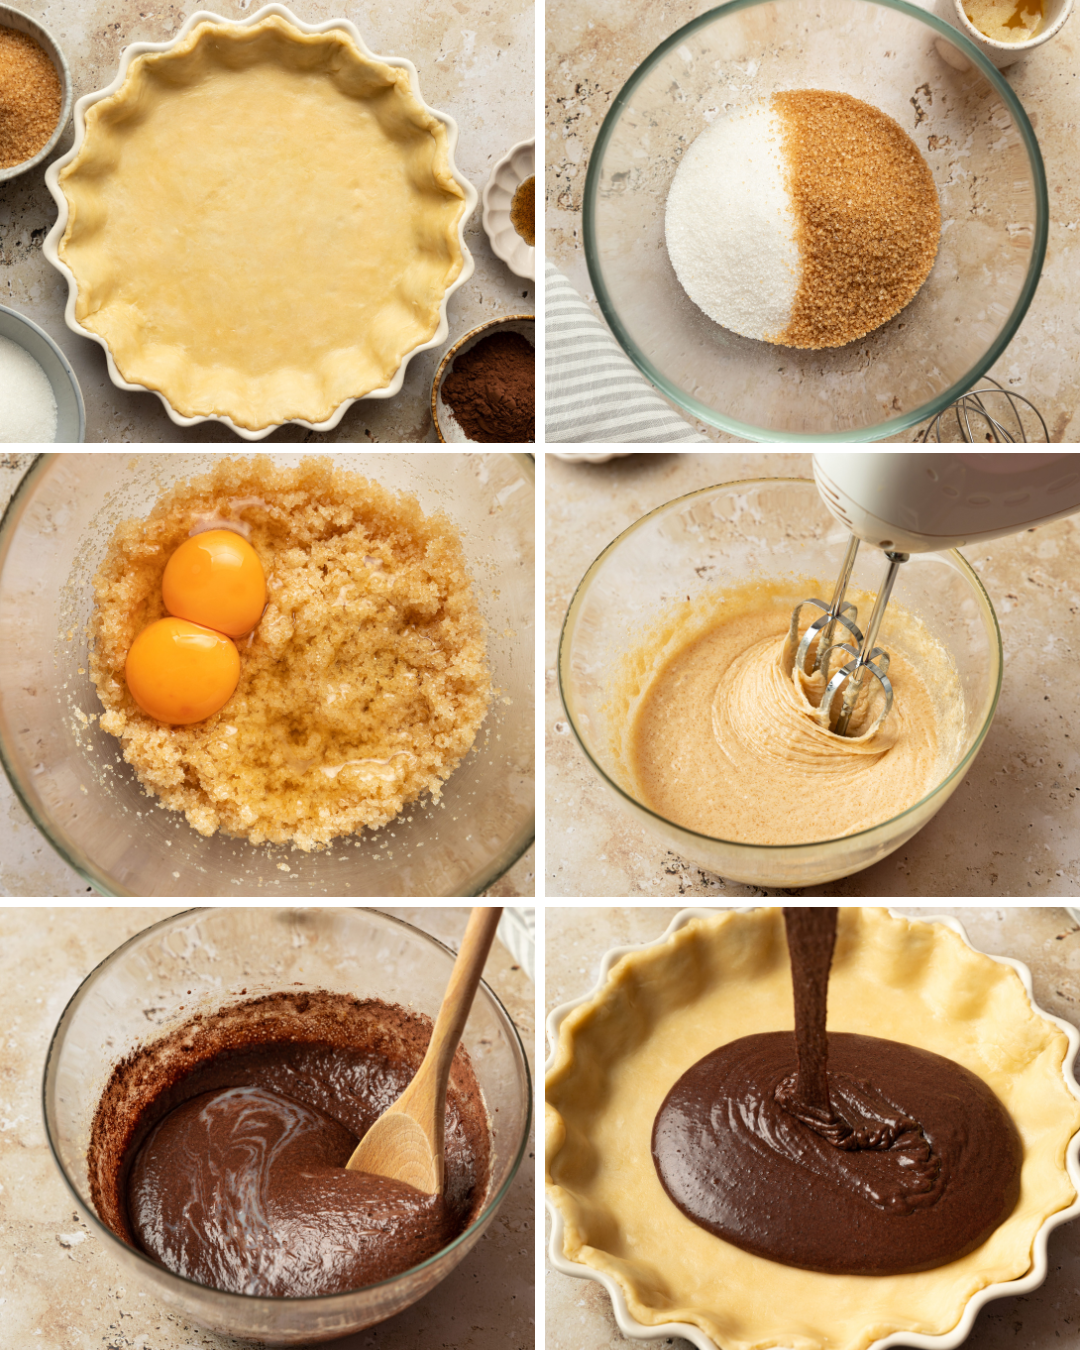 Step by step assembly of a chocolate chess pie recipe